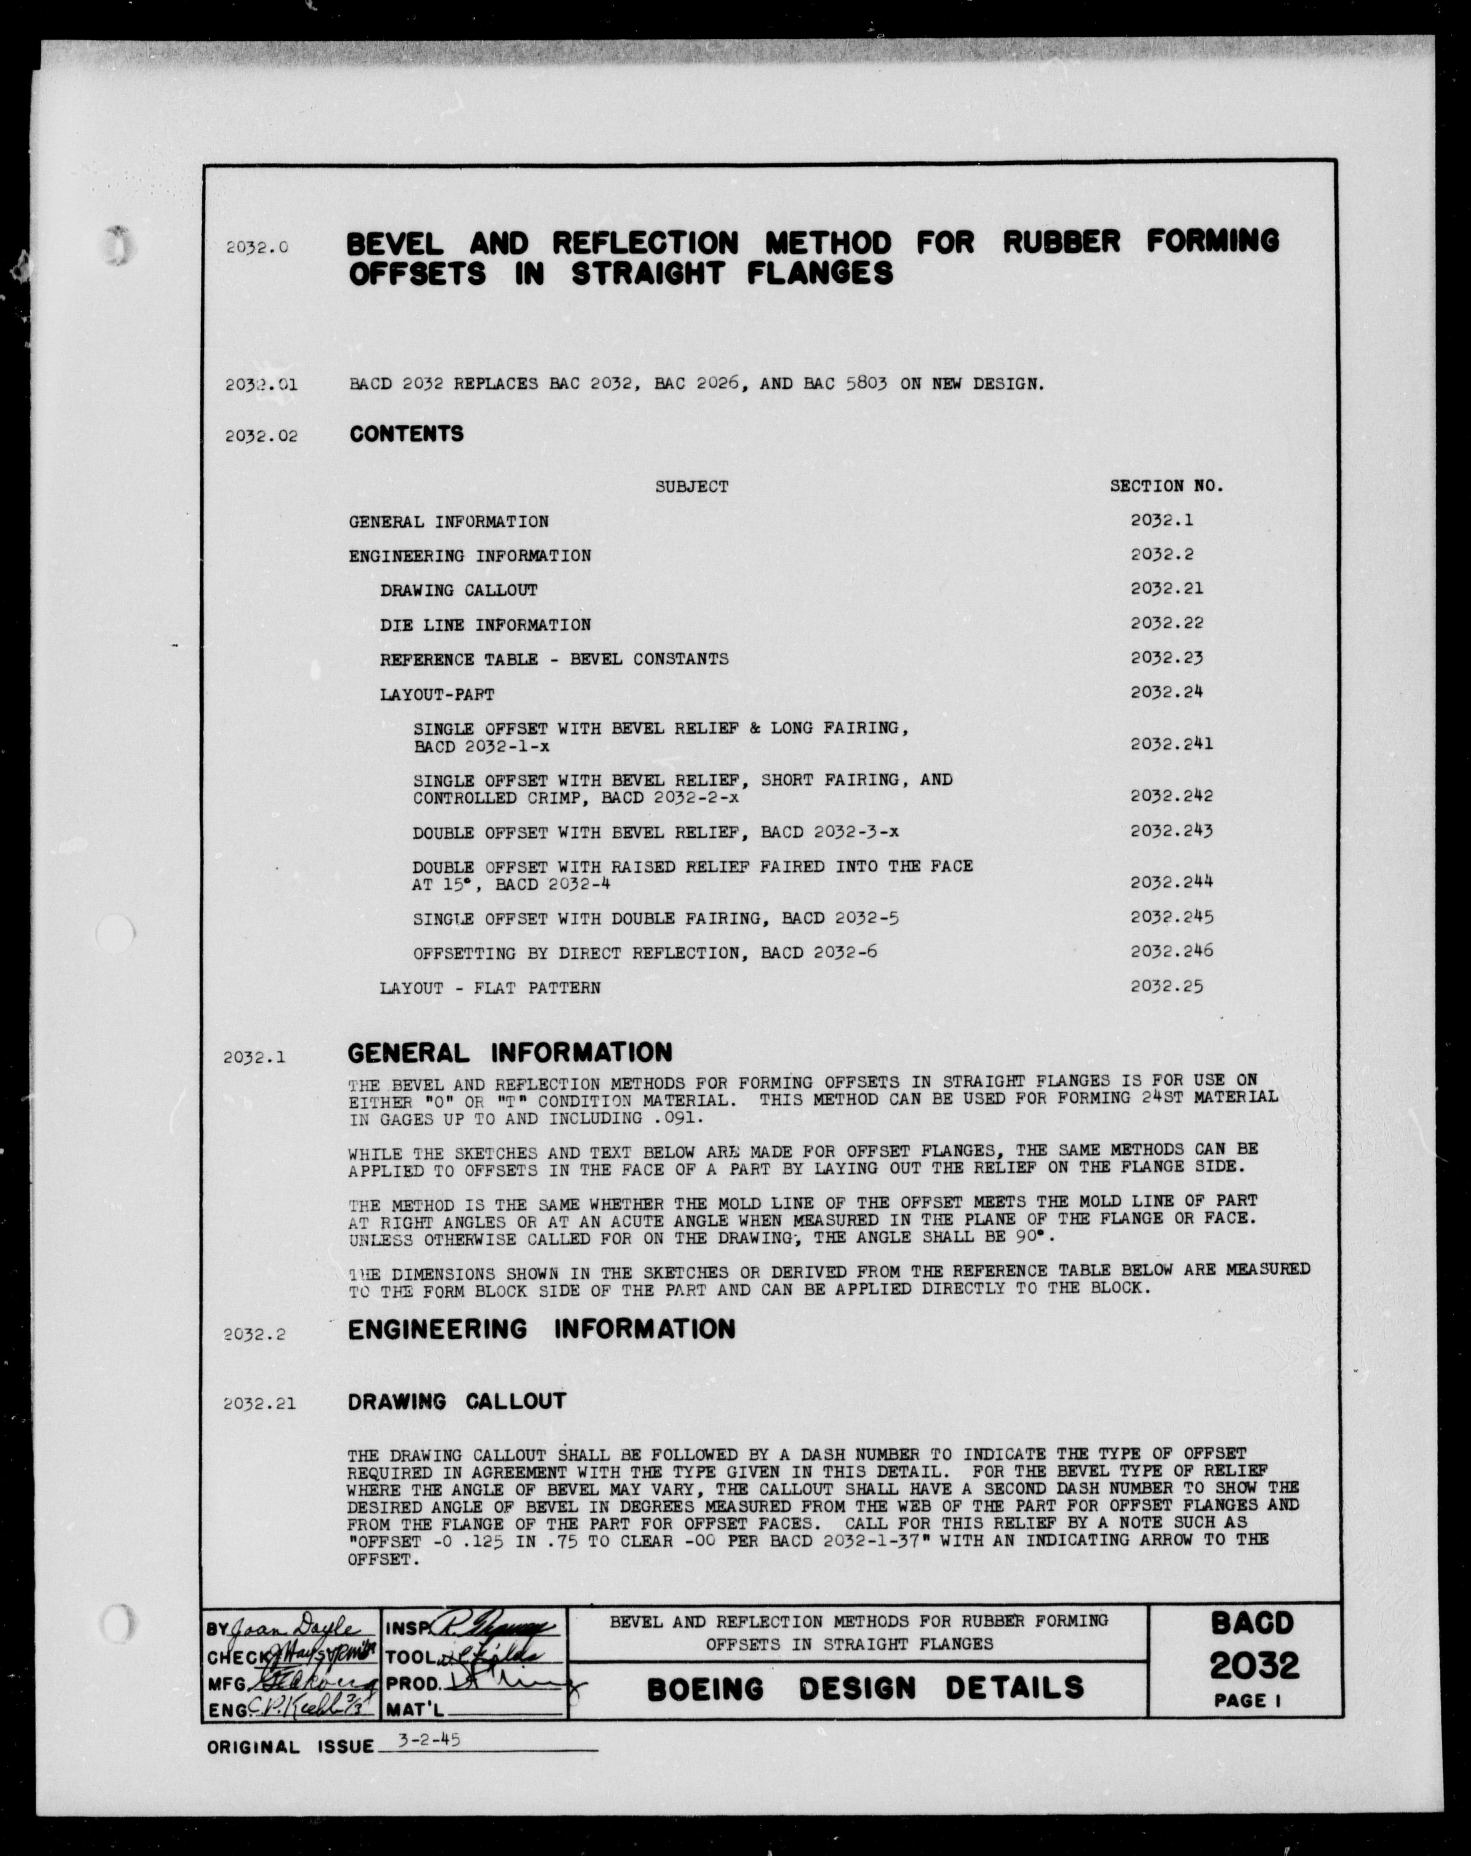 Sample page 1 from AirCorps Library document: Bevel and Reflection Methods for Rubber Forming Offsets in Straight Flanges